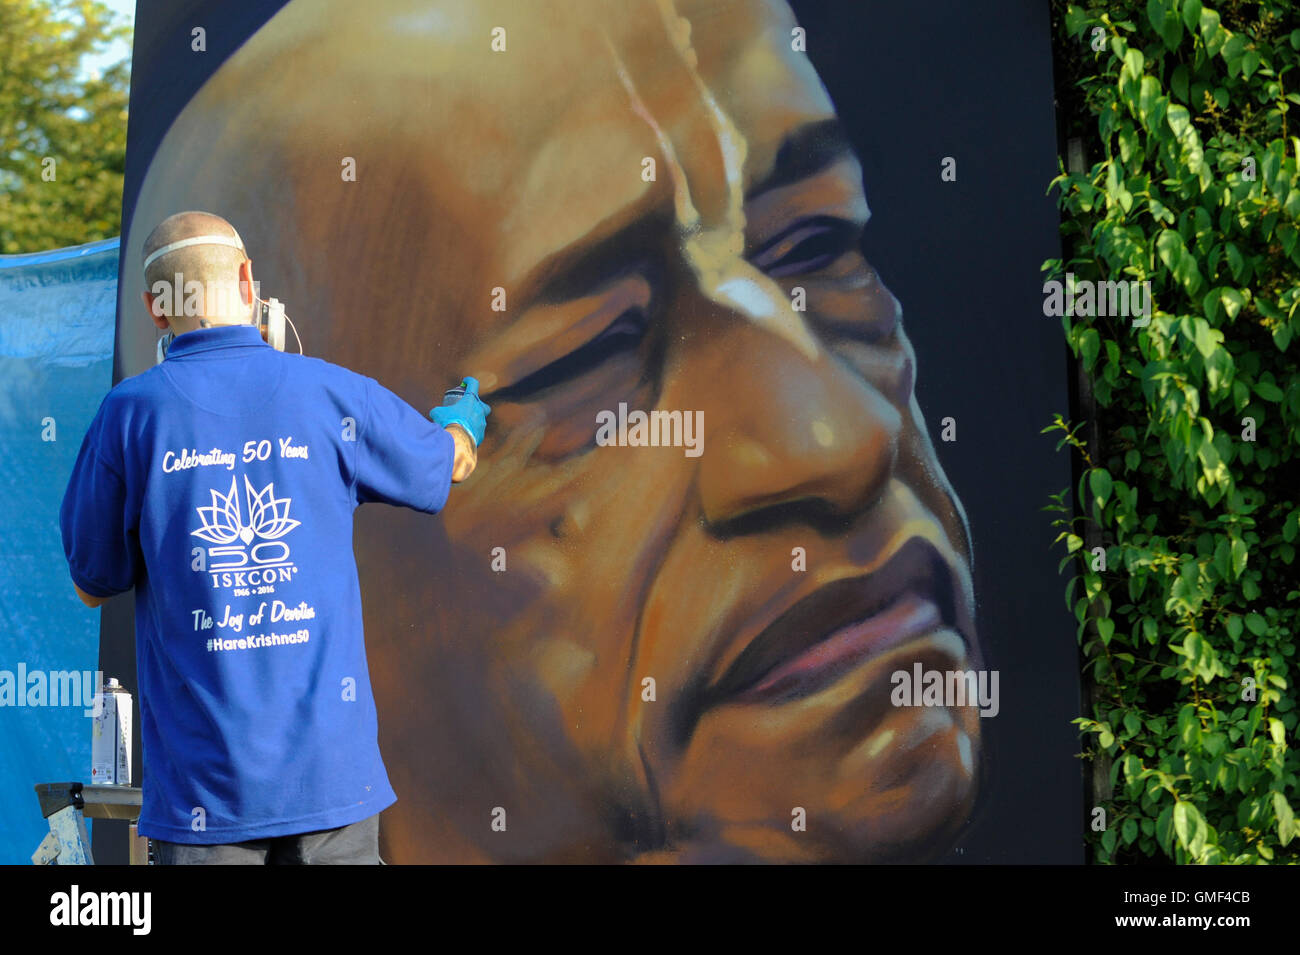 London, UK.  25 August 2016.  A devotee spray paints an image of the founder of ISCON, A.C. Bhaktivedanta, Swami Prabhupada, attend the biggest Janmashtami festival outside of India at the Bhaktivedanta Manor Hare Krishna Temple in Watford, Hertfordshire.  The event celebrates the birth of Lord Krishna. Credit:  Stephen Chung / Alamy Live News Stock Photo